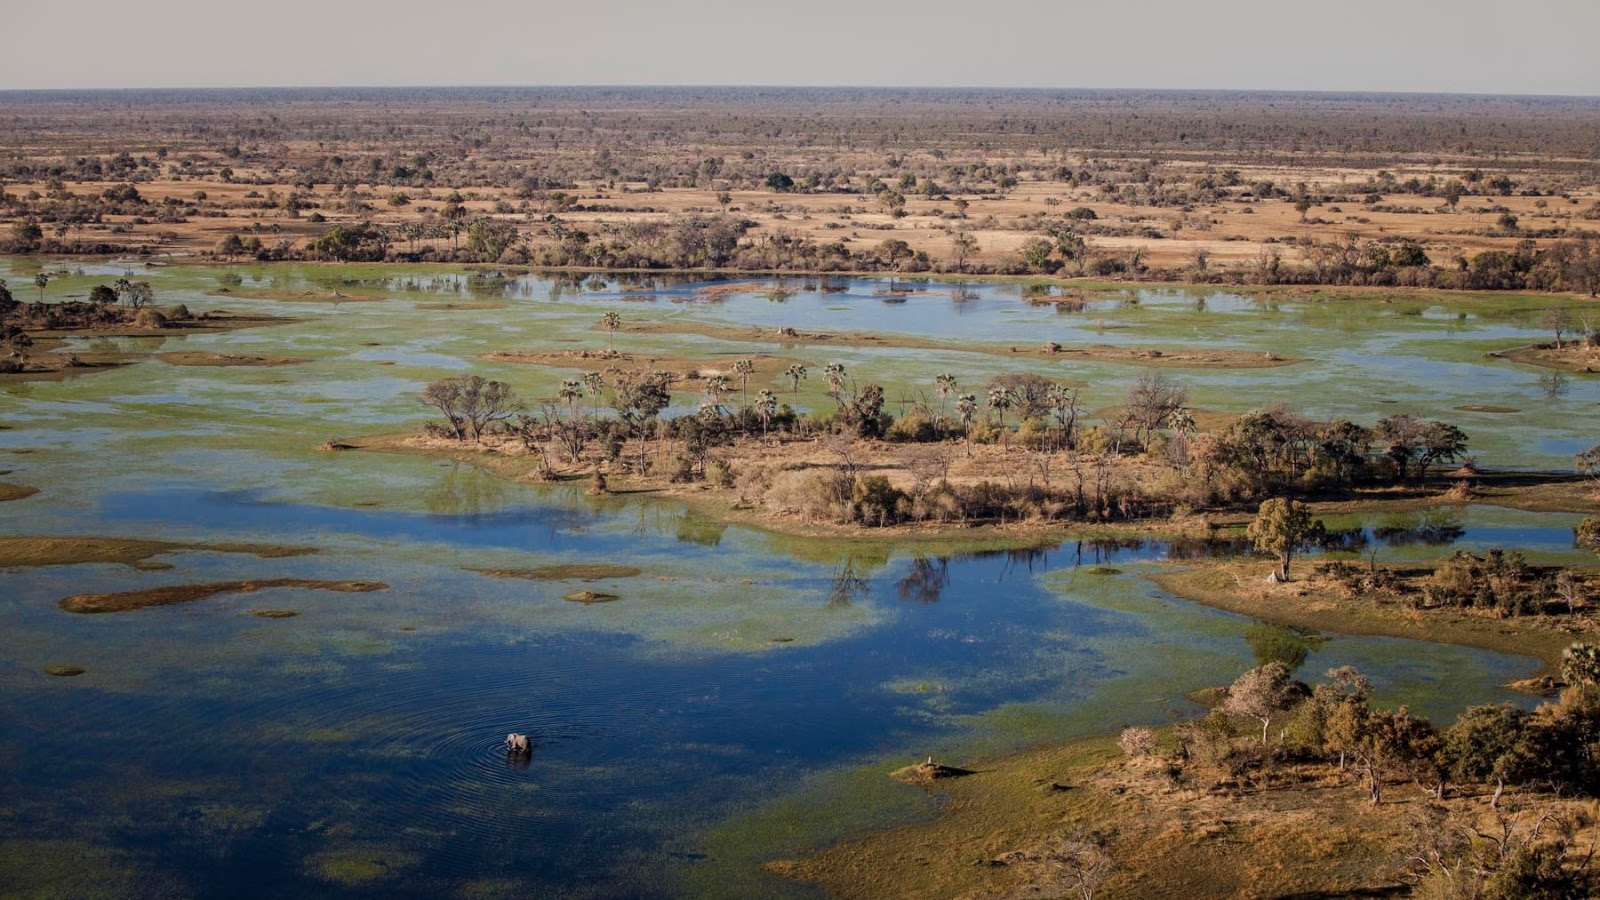 An aerial view of the Okavango Delta, a UNESCO World Heritage site under threat from nearby oil exploration.